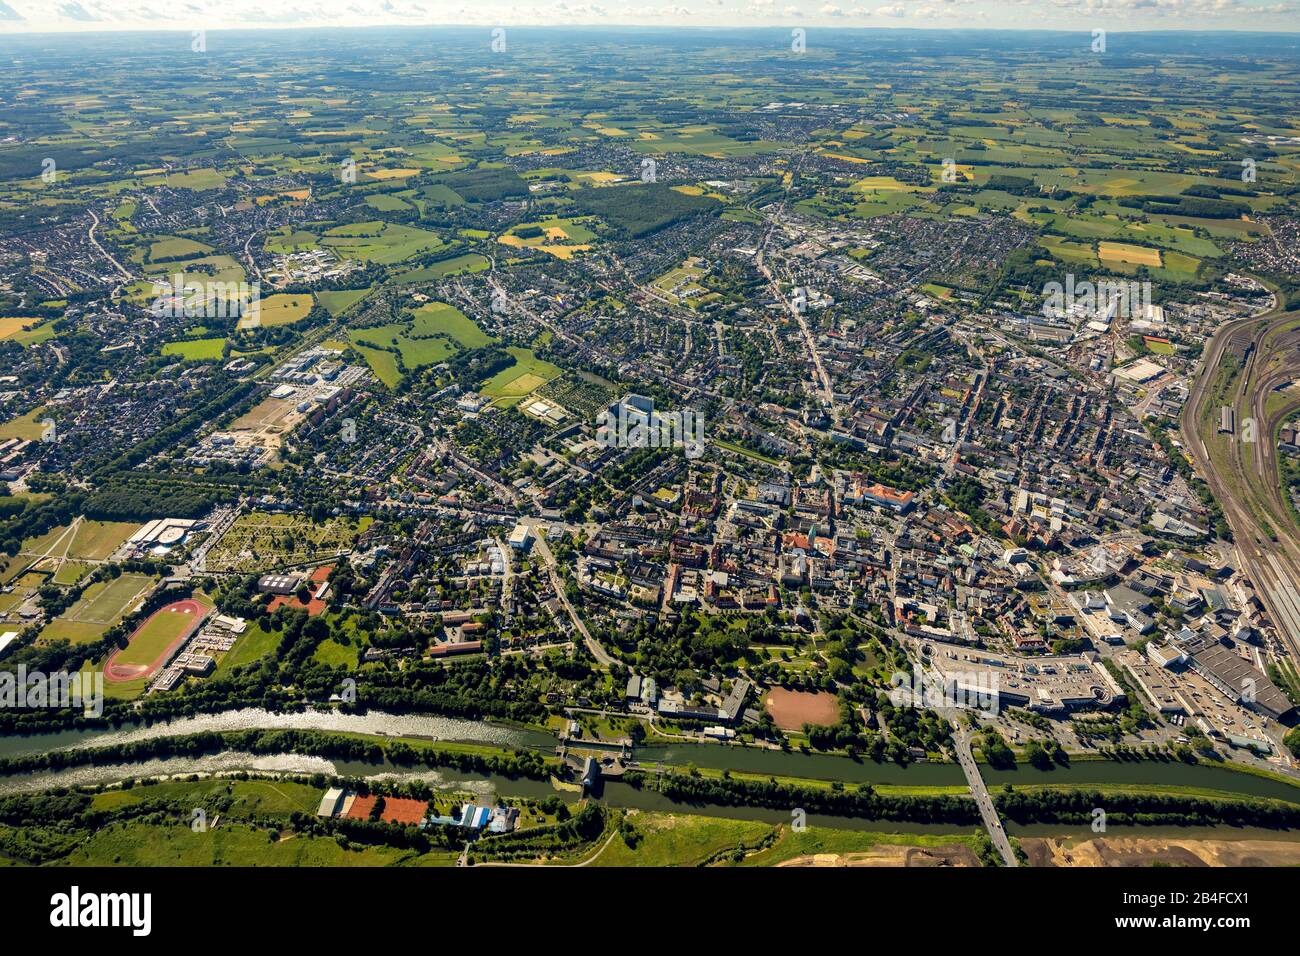 Aerial view of Lippeumbau nature and landscape conservation project experience space Lippeaue with Datteln Hamm channel and airfield Hamm-Lippewiesen, EDLH, with connection to the city center of Hamm in Killwinkel, Hamm, Ruhr area, North Rhine-Westphalia, Germany, Stock Photo